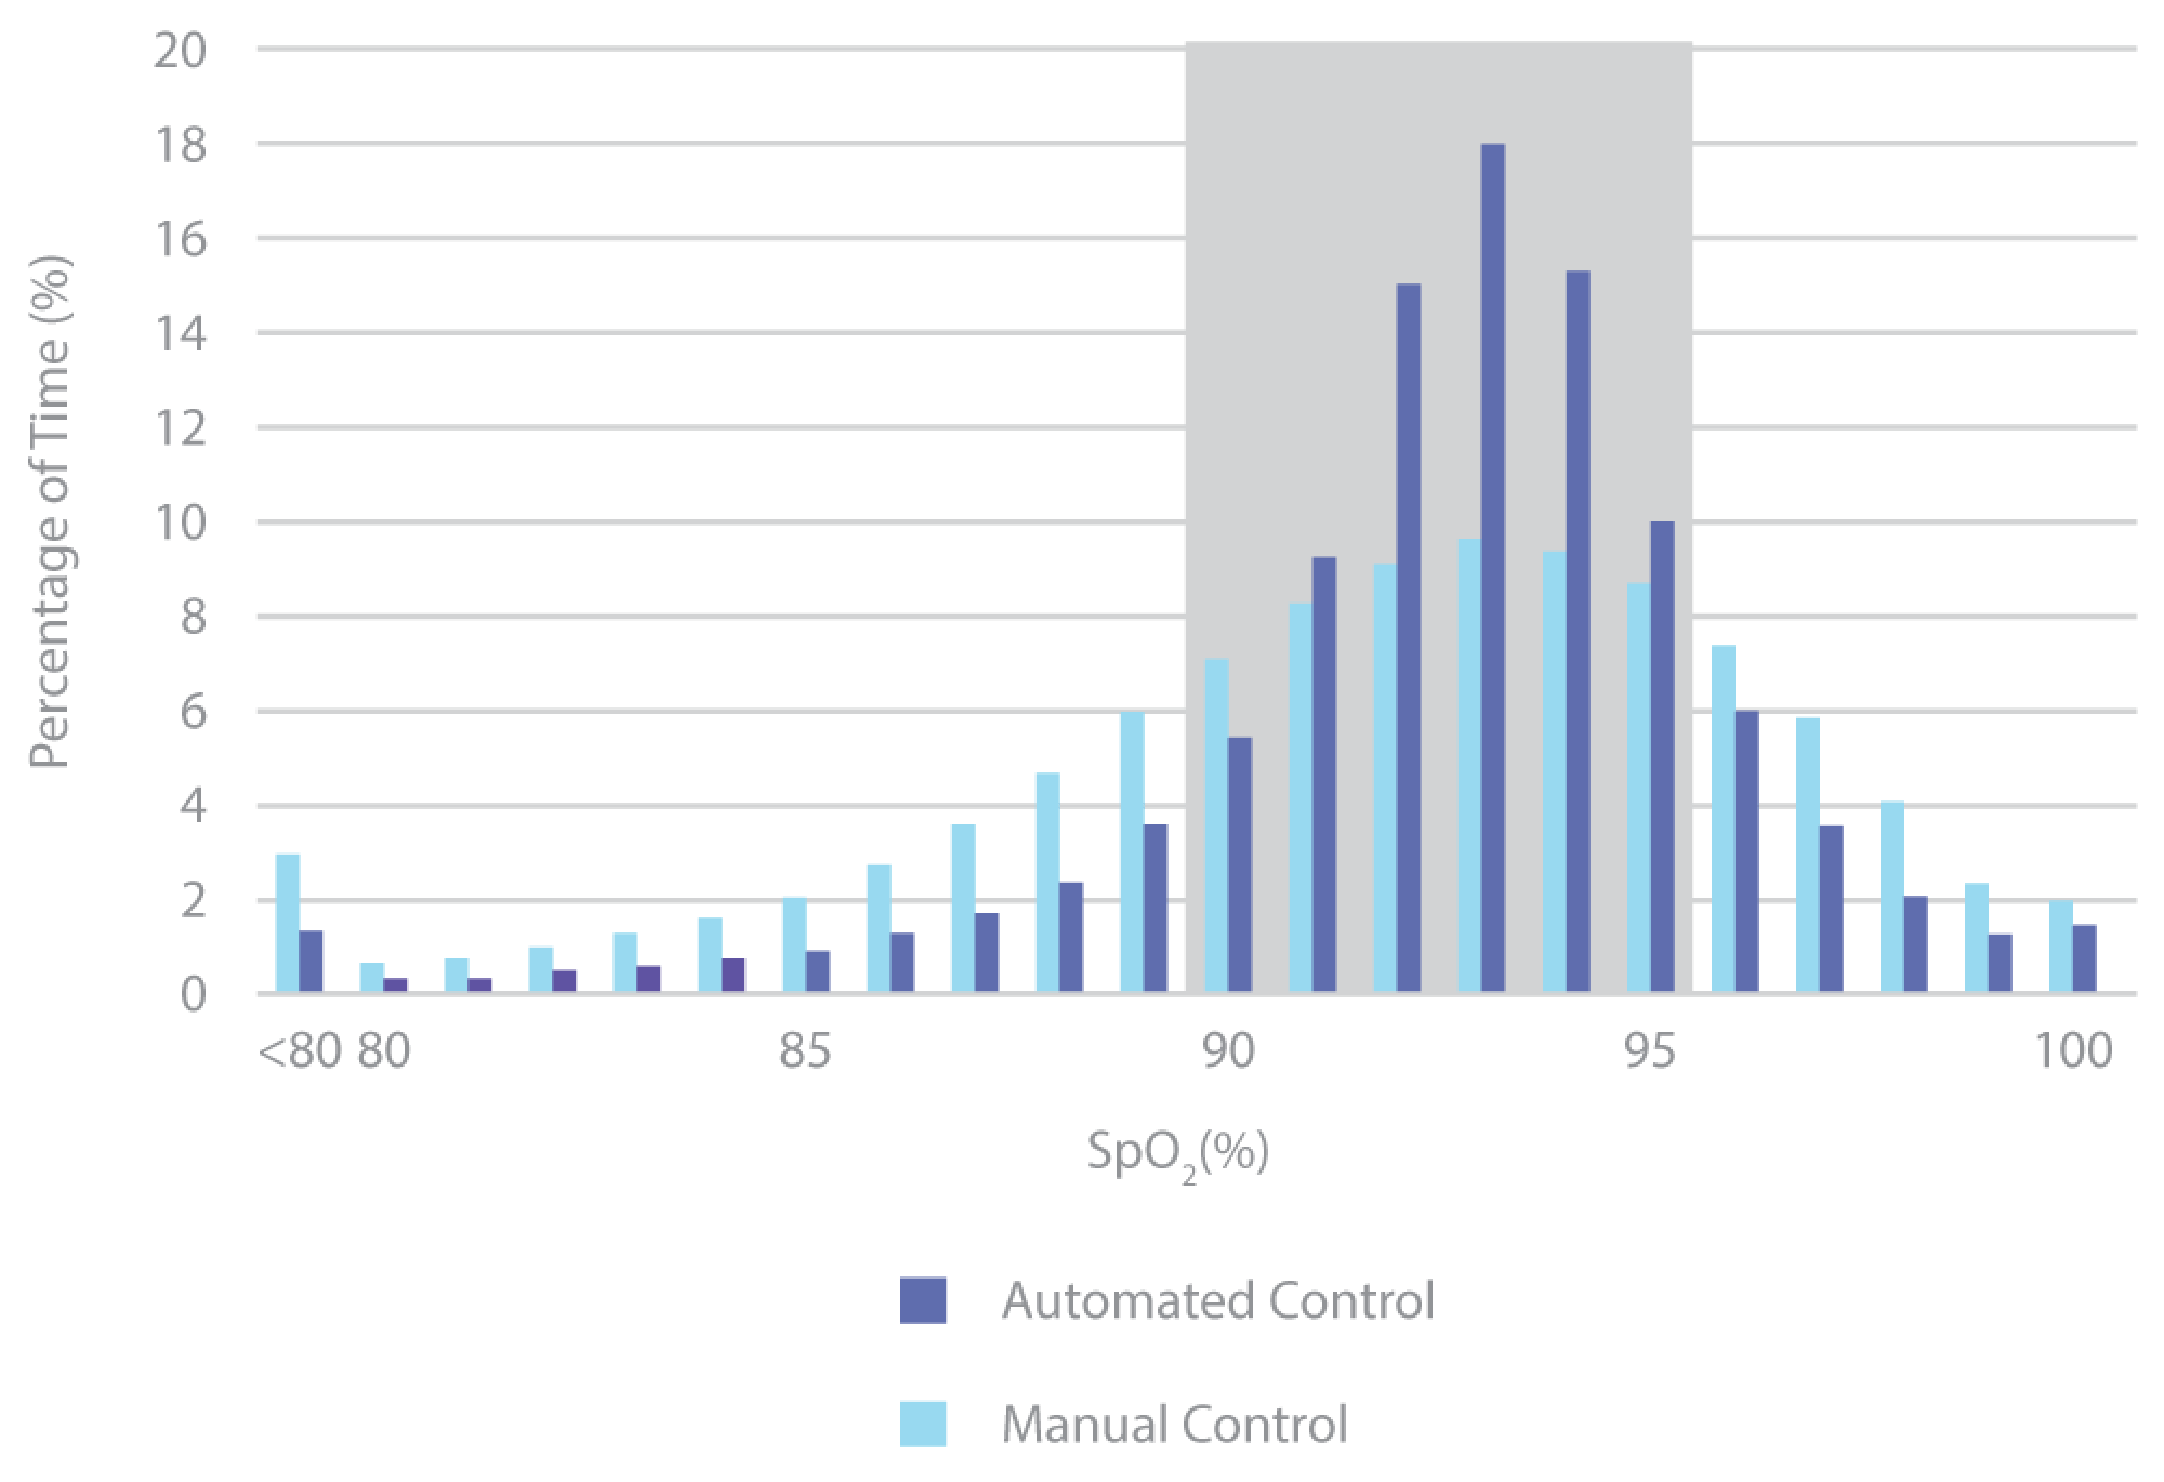 A bar graph depicting the proportion of time spent in the SpO2 target range, comparing manual and automated oxygen control.